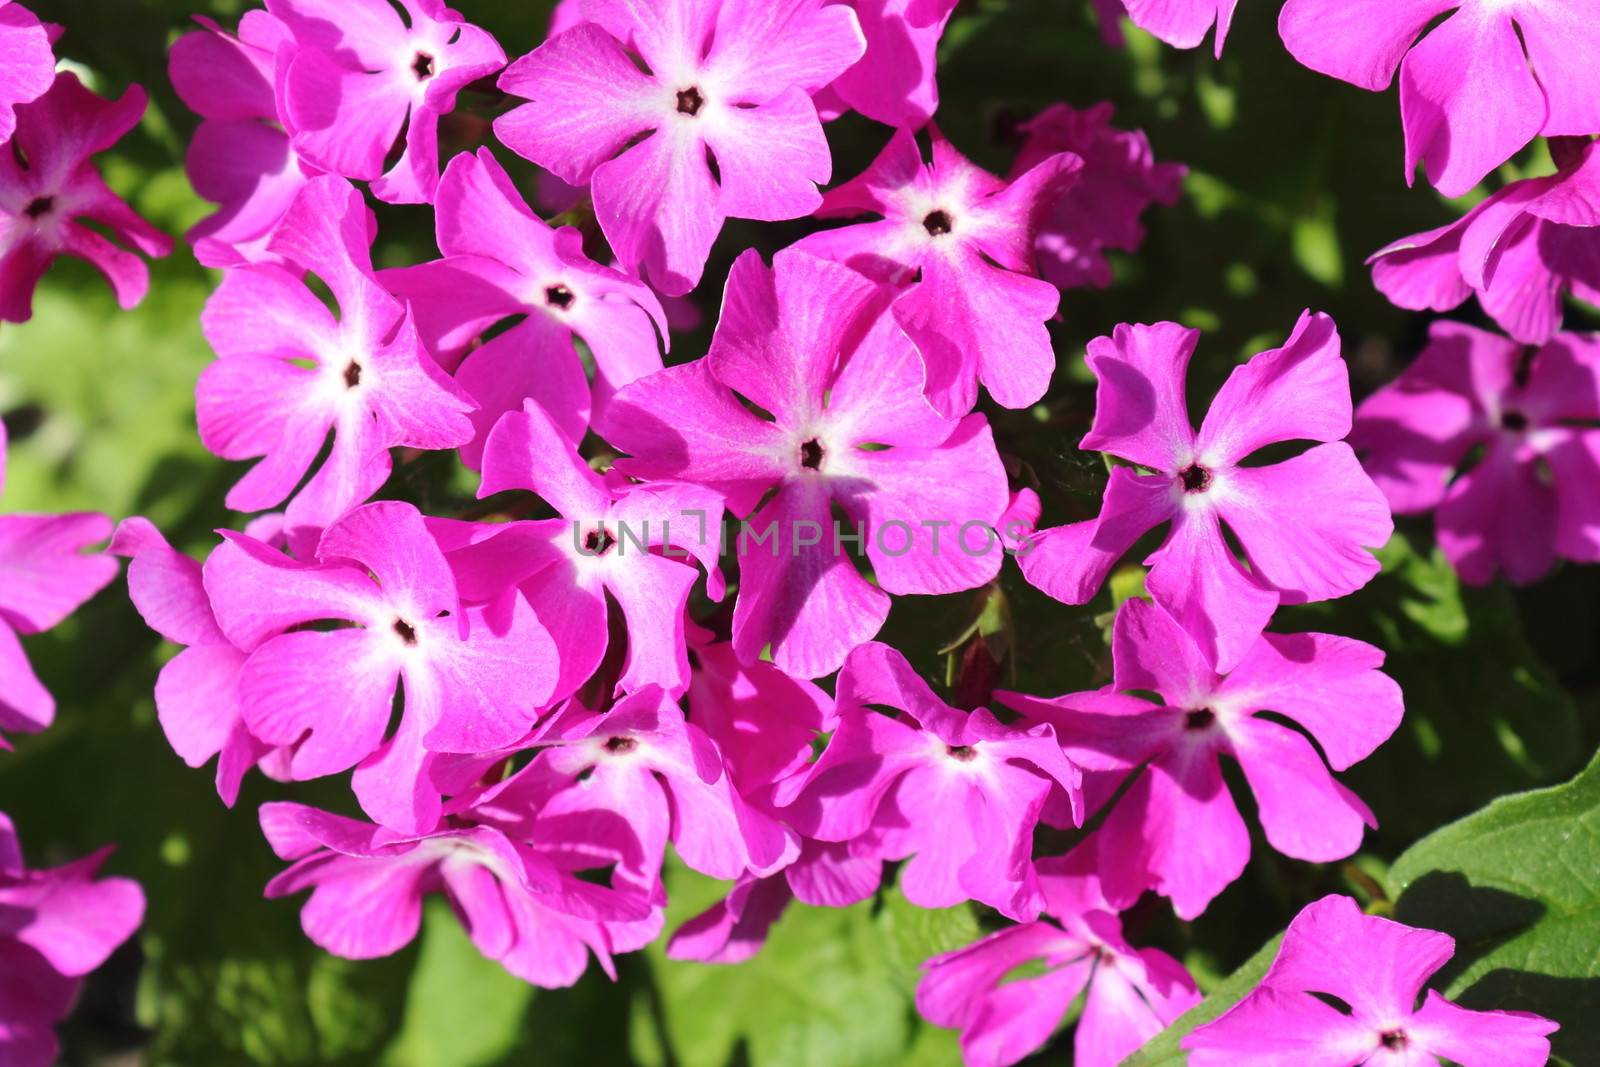 The pink flowers of a primrose shined with the sun, are photographed by a close up

